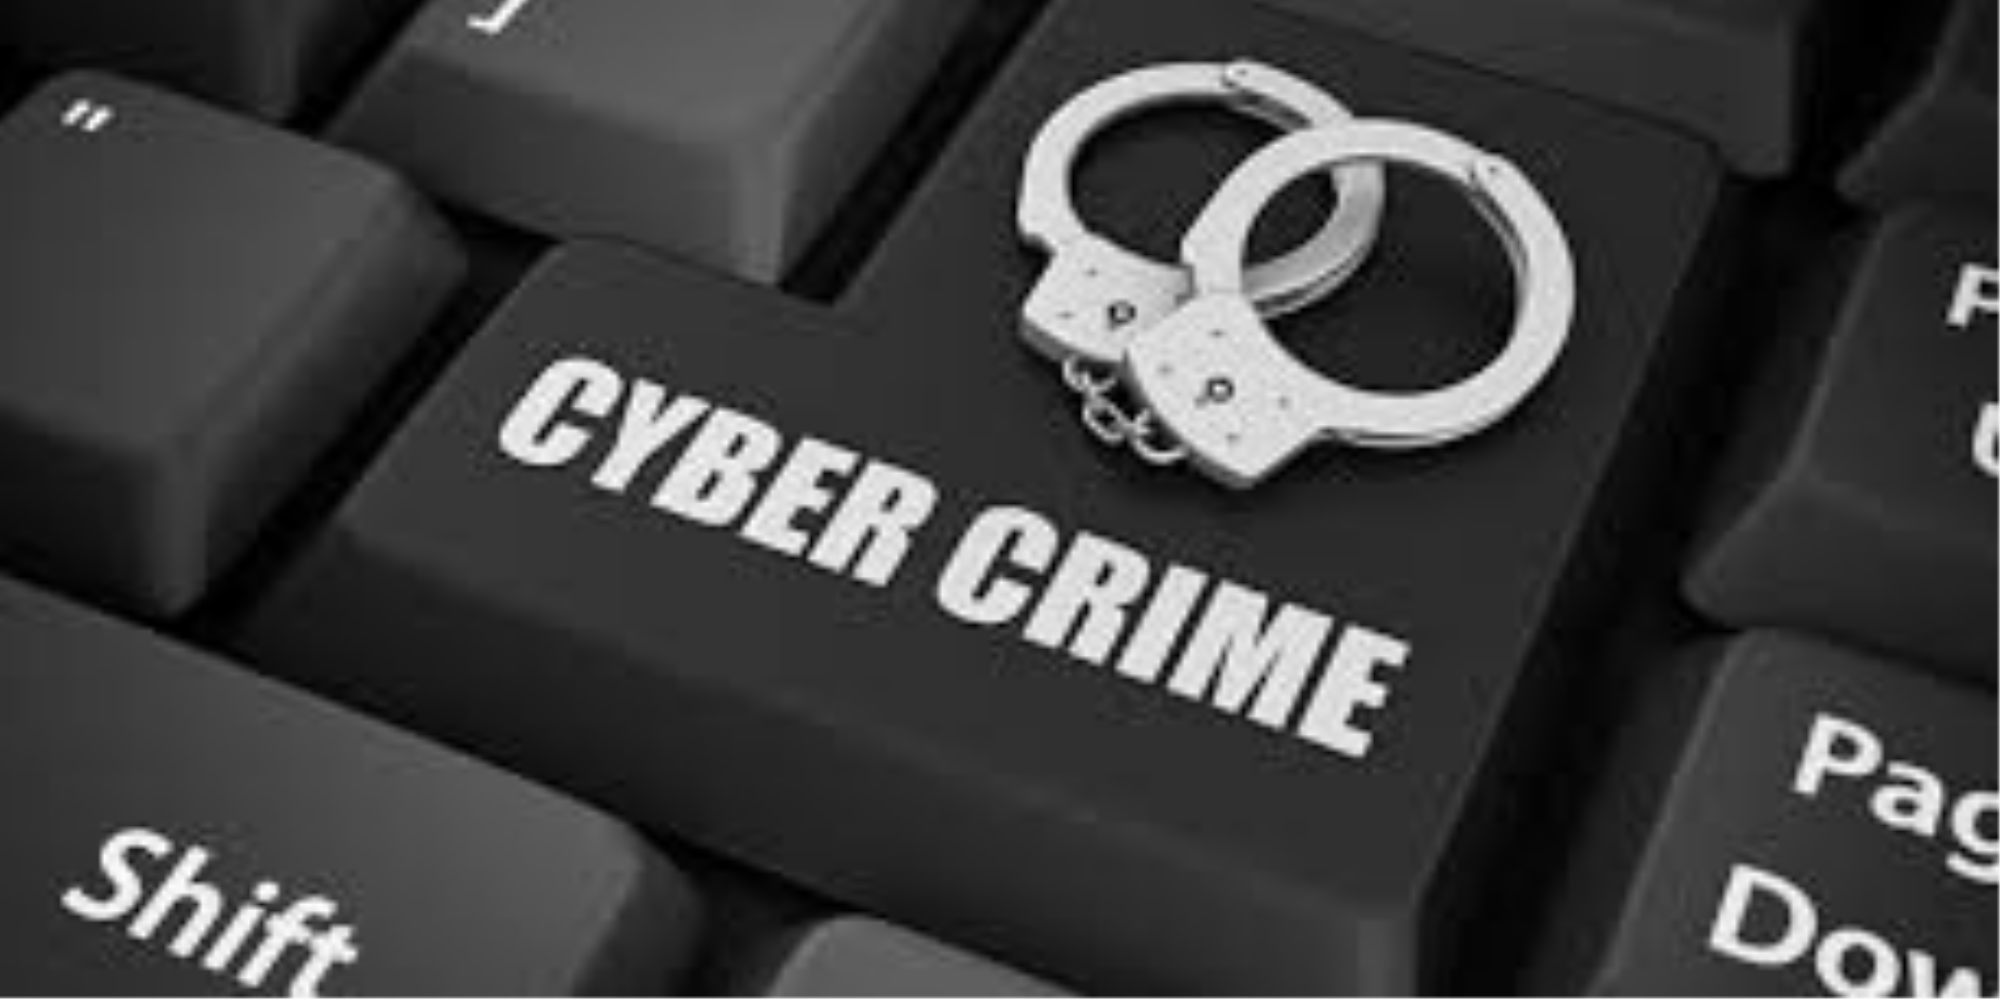 Cybercrime Investigation and Prosecution: The Jurisdictional Challenge and Way Forward